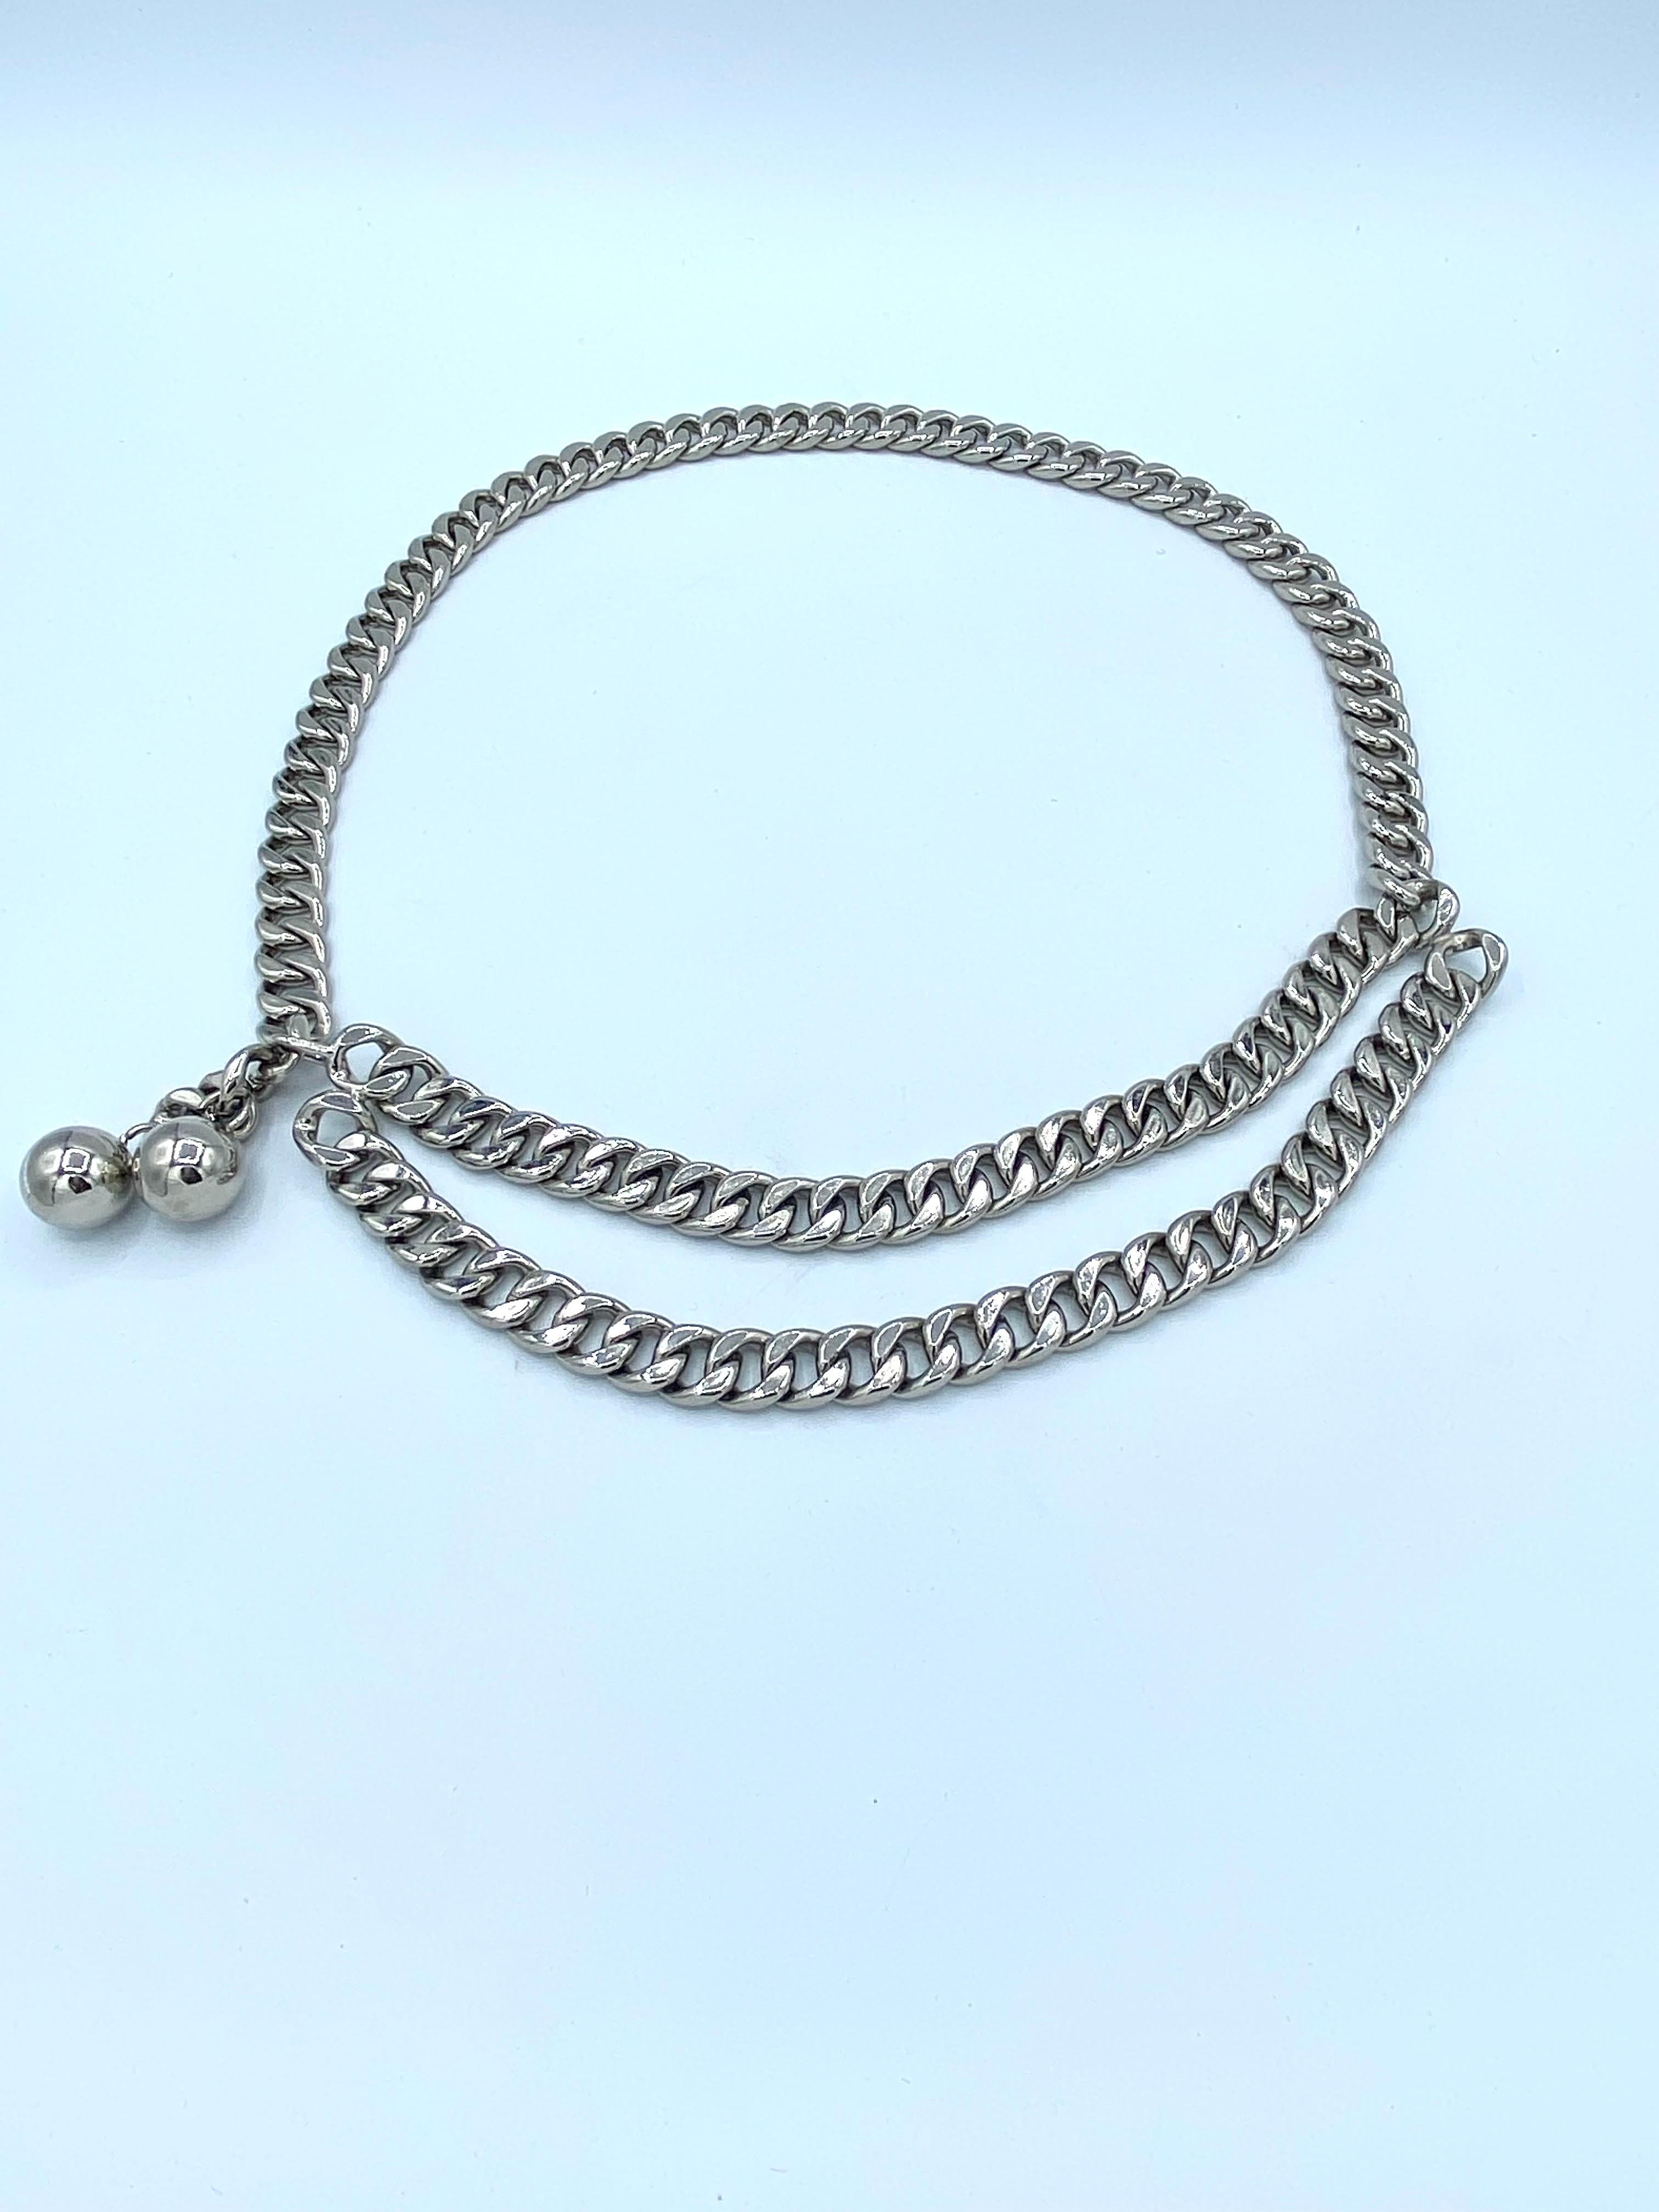 Vintage Chanel belt in silver links dating from the 1990s, hook closure stamped Chanel, ending with two bells.
At the widest the belt is 85cm.
The width of the chain is 1.5cm.
Comes with a Chanel box.
The belt is in very good vintage condition, only